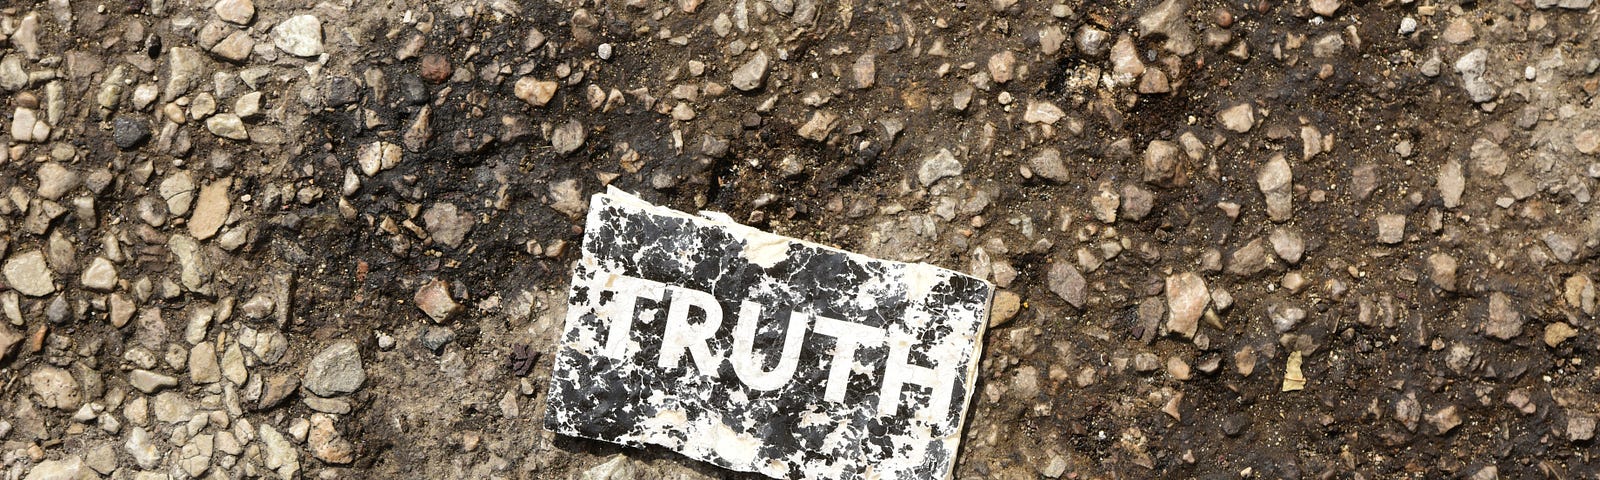 The word “truth” is printed on a dirty, trampled card, which lies on muddy gravel.